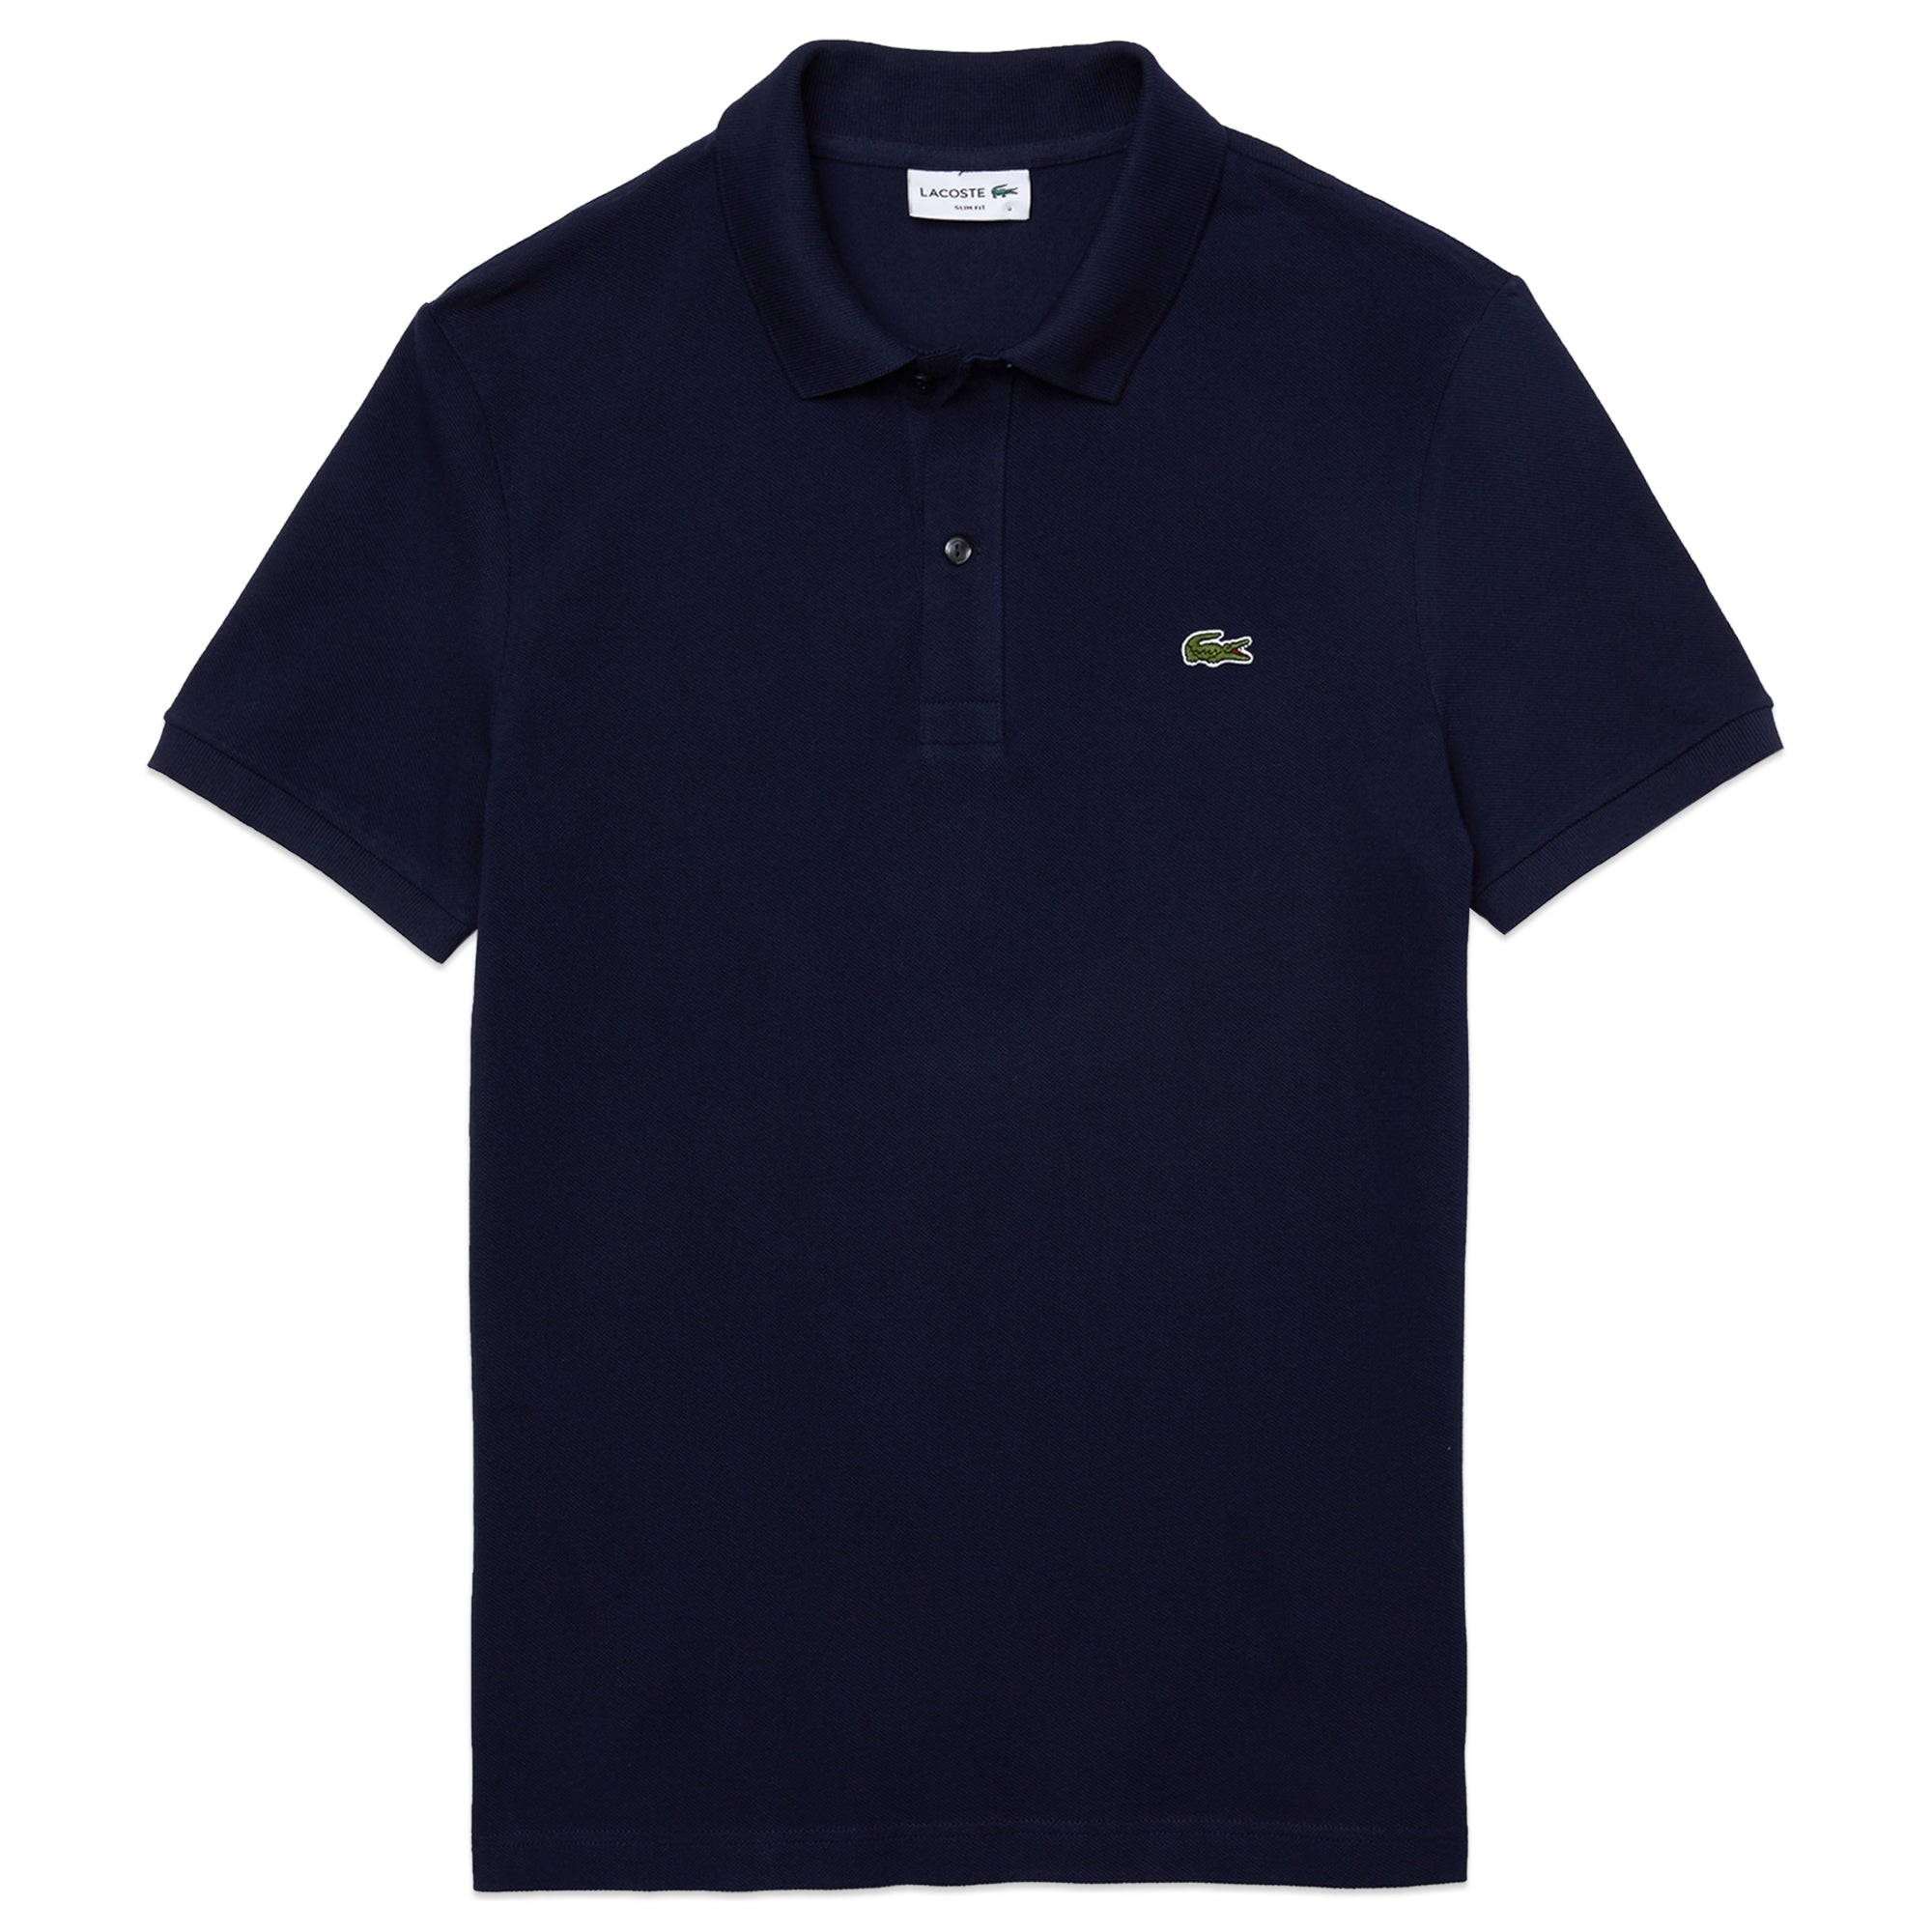 Lacoste Short Sleeved Slim Fit Polo PH4012 - Argentina Blue